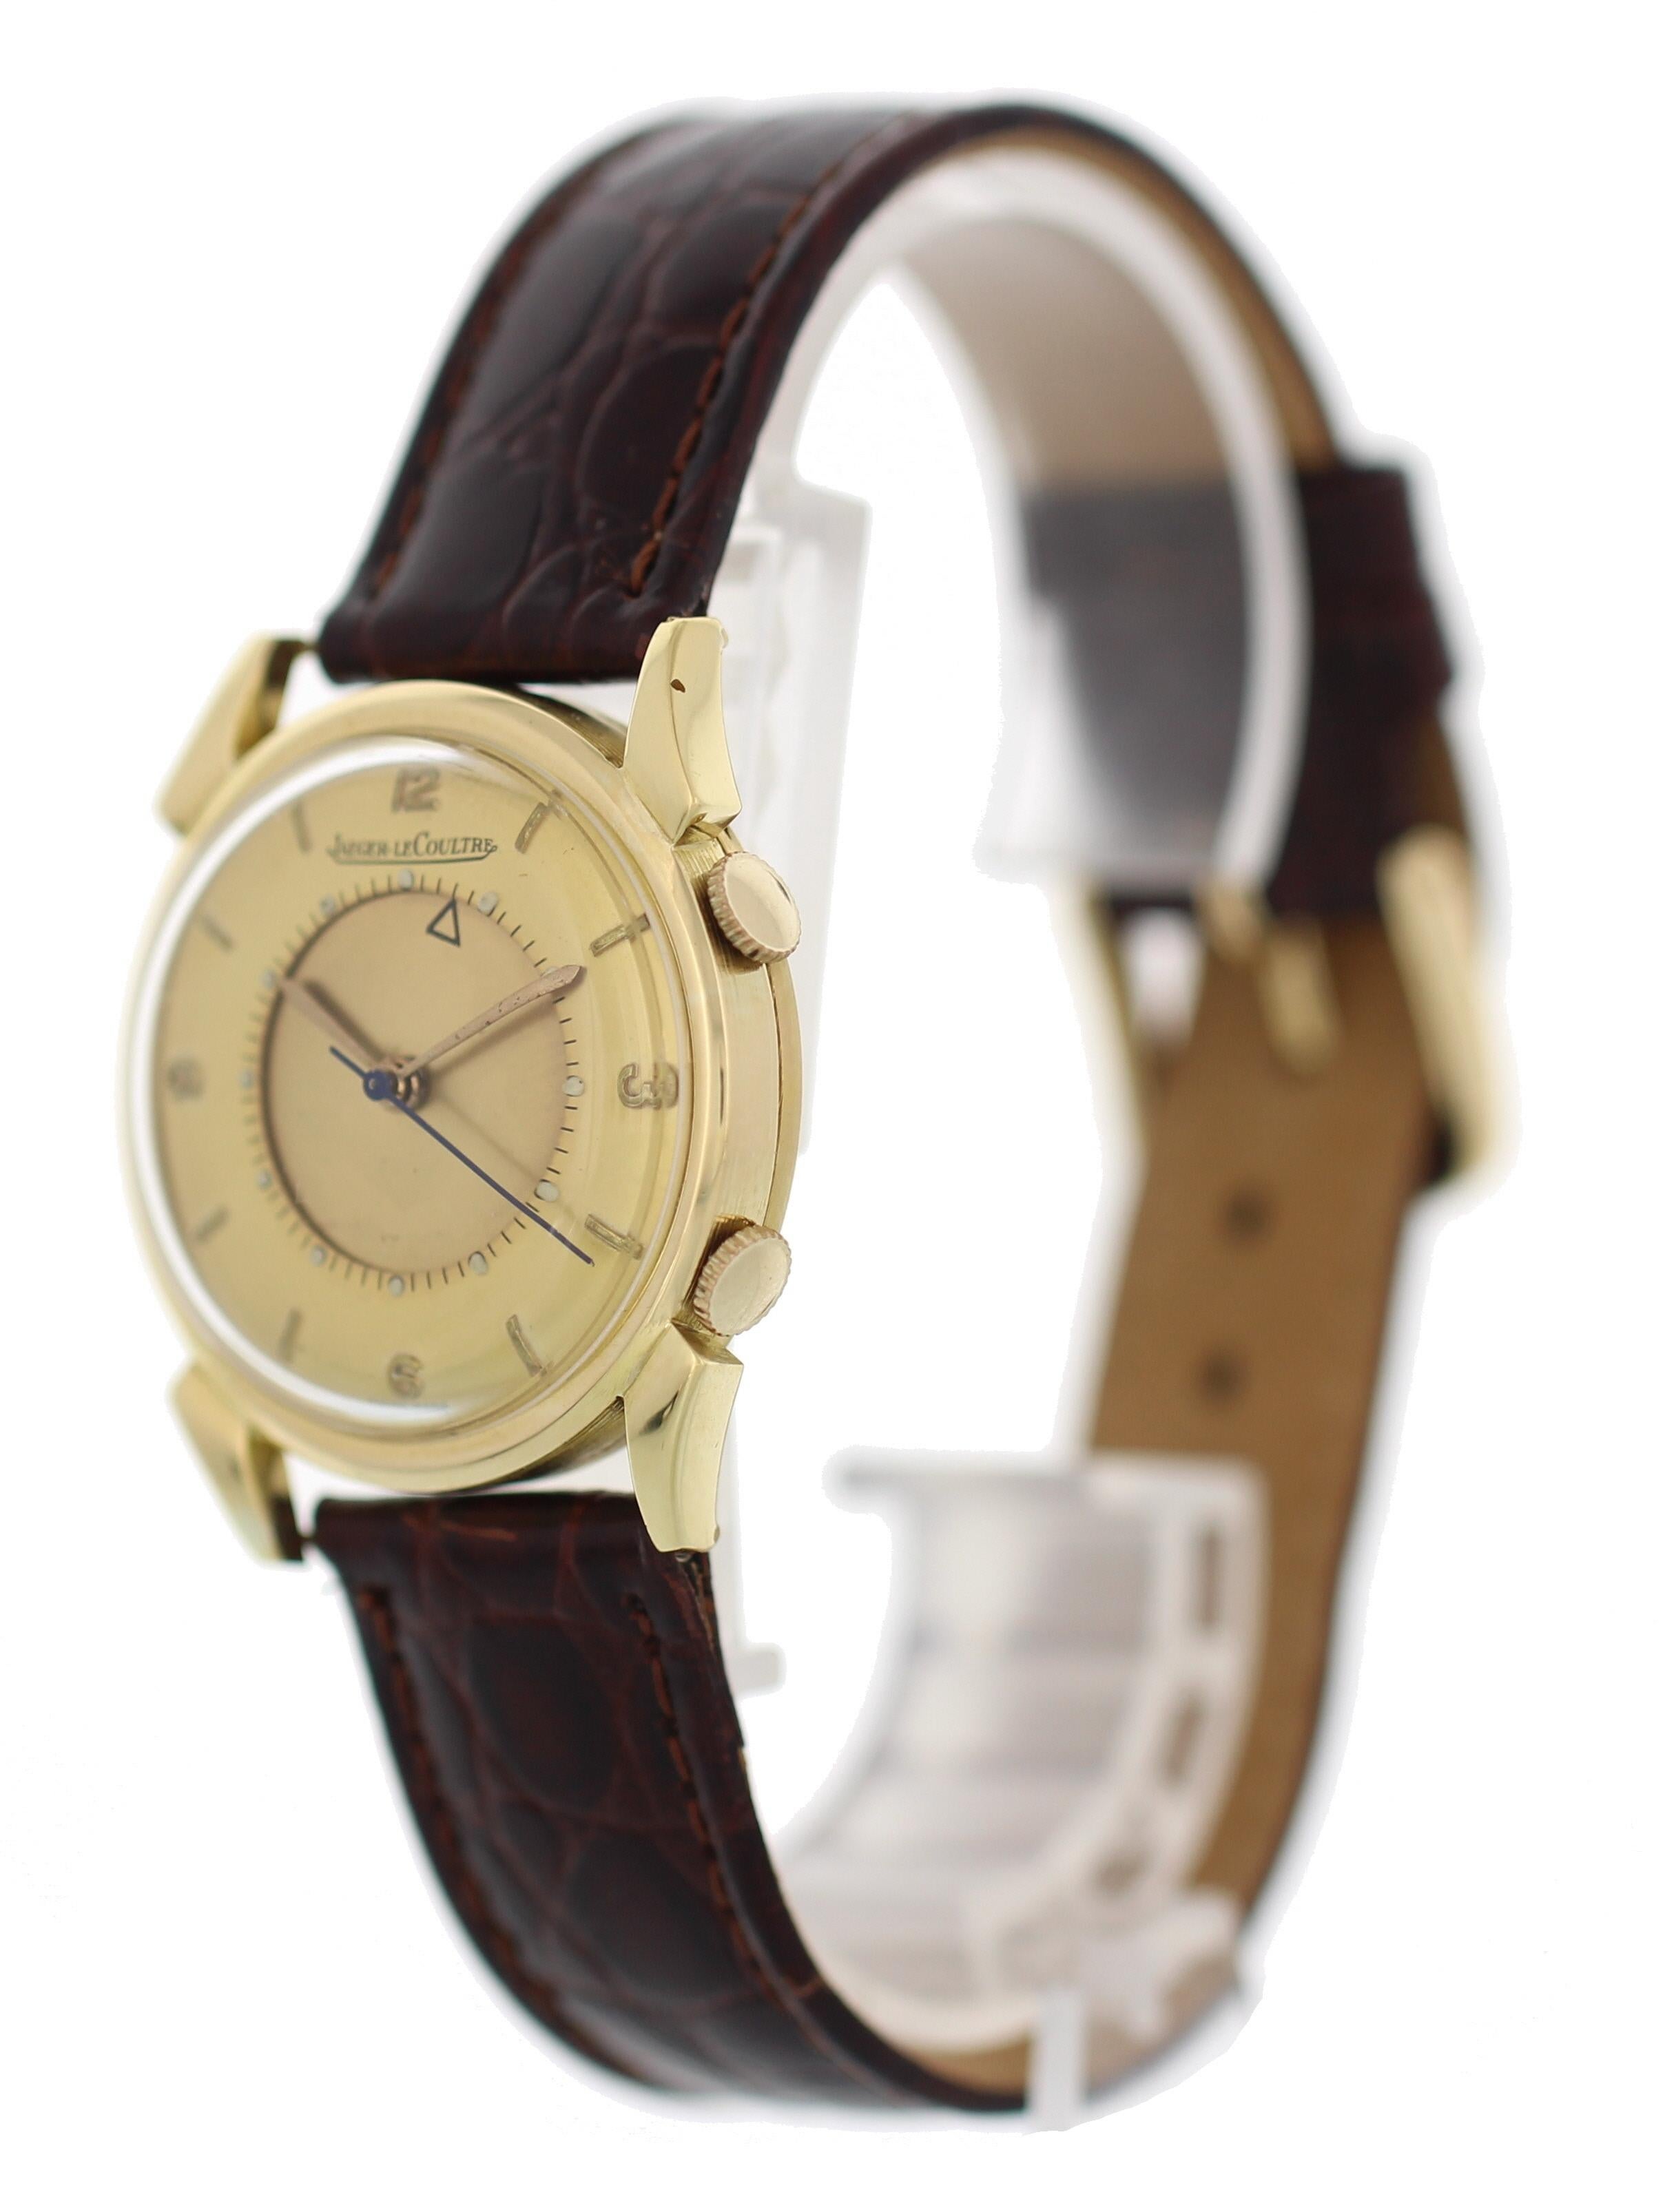 Jaeger-LeCoultre Memovox Alarm 18 Karat Yellow Gold Watch In Excellent Condition For Sale In New York, NY